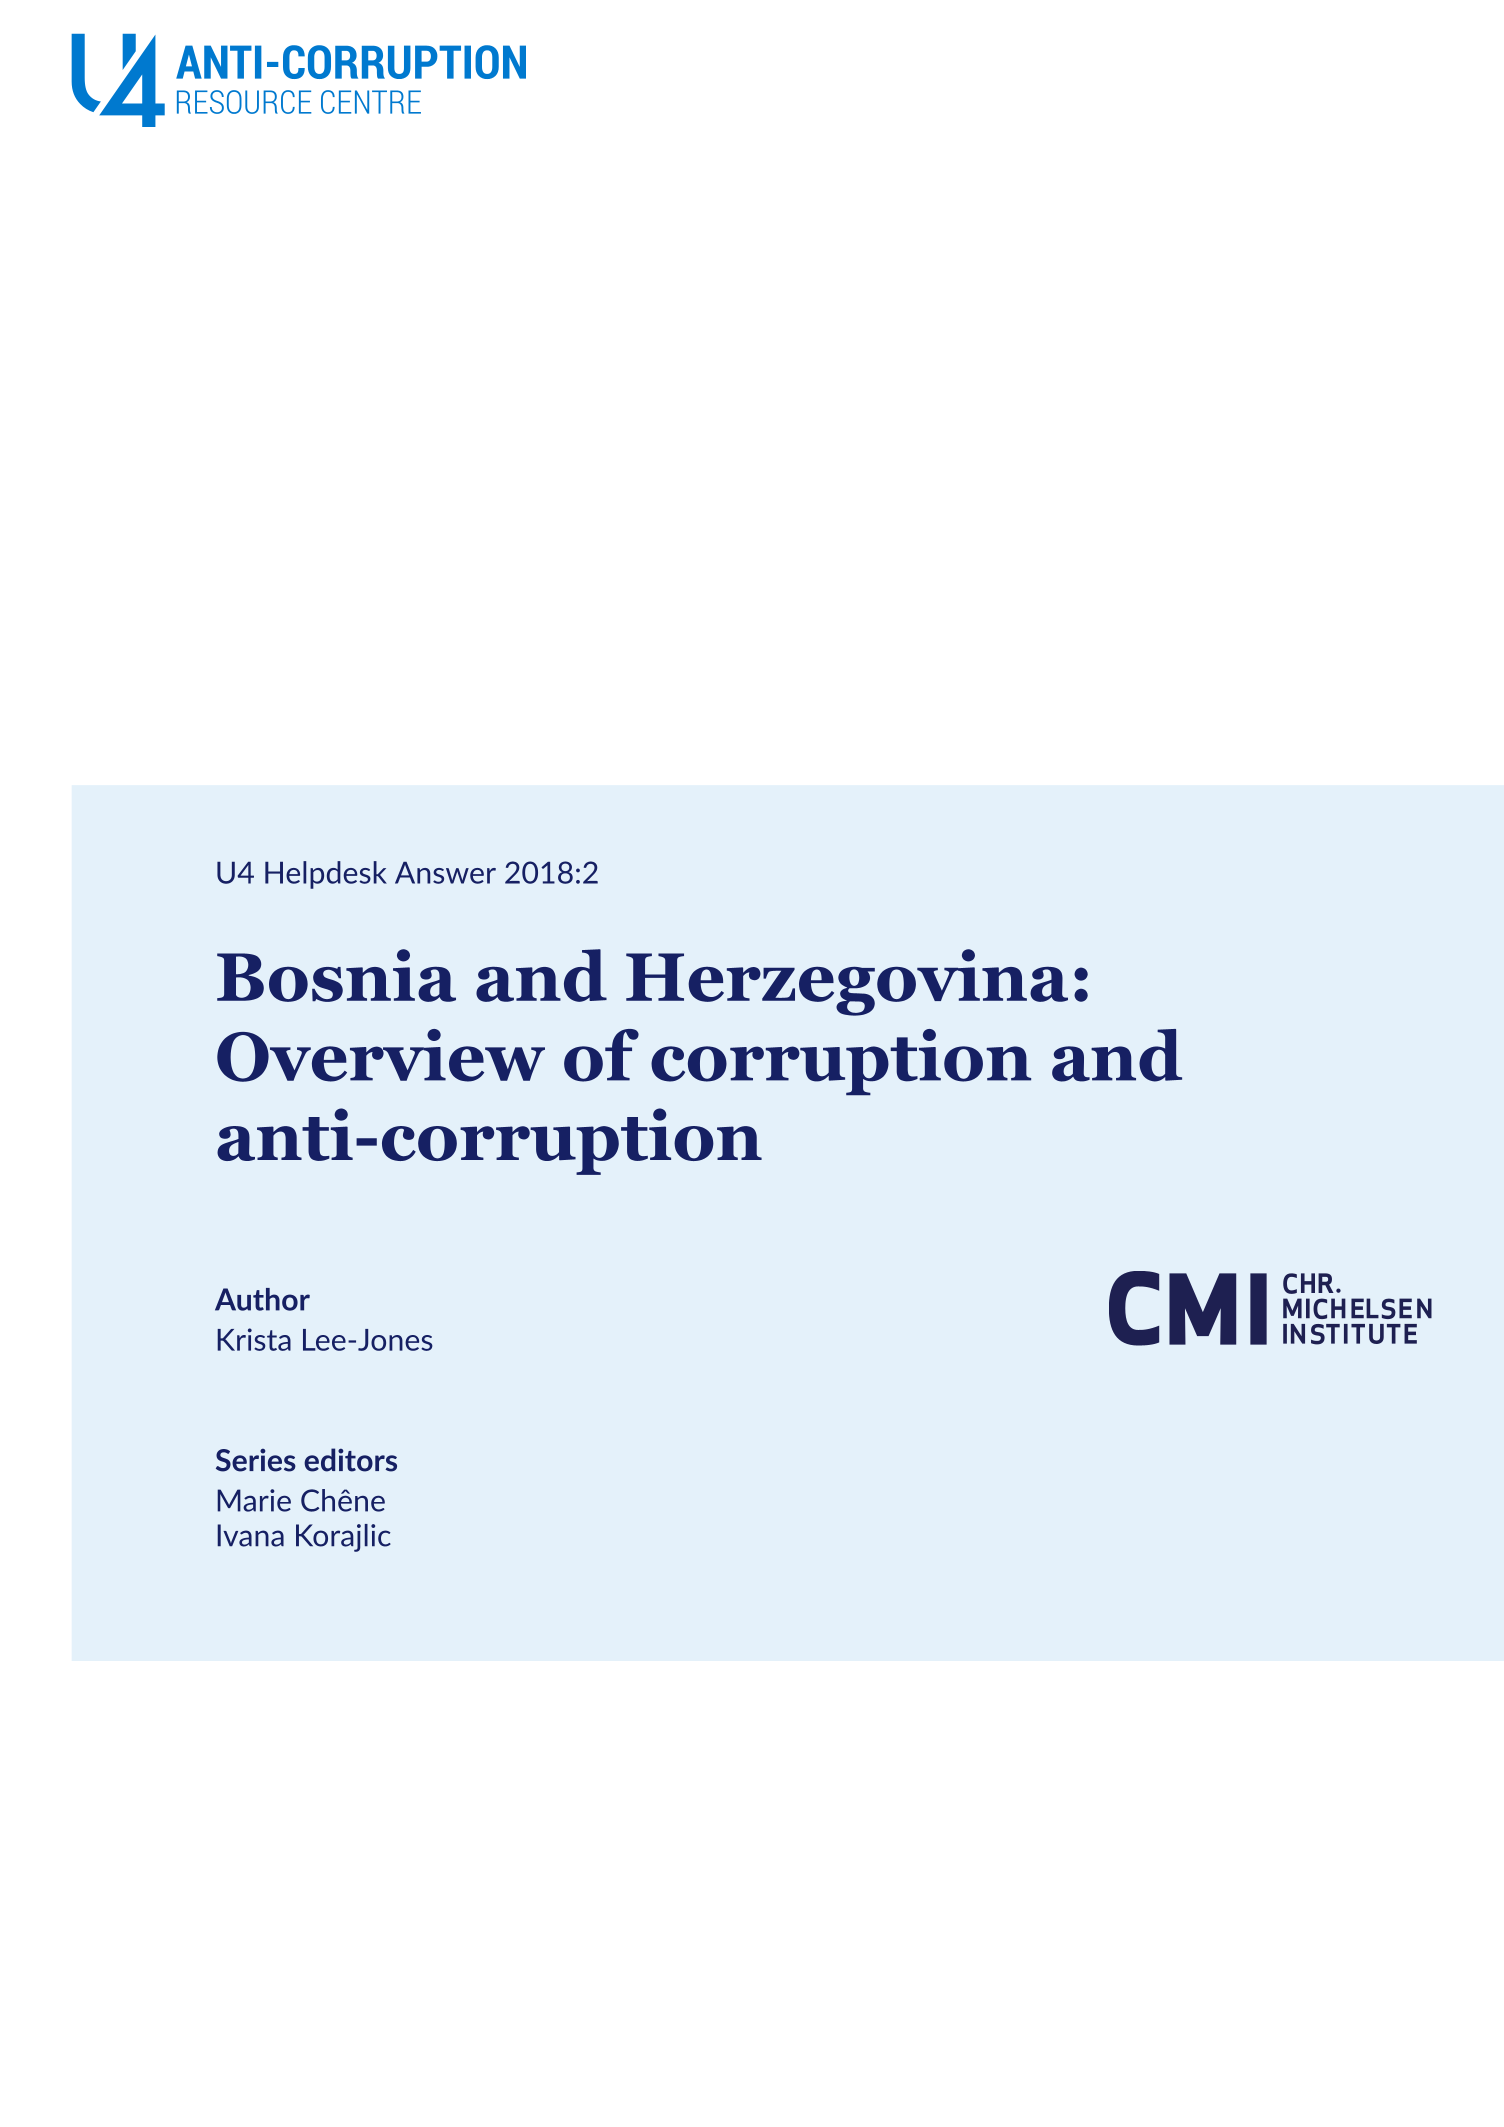 Bosnia and Herzegovina: Overview of corruption and anti-corruption